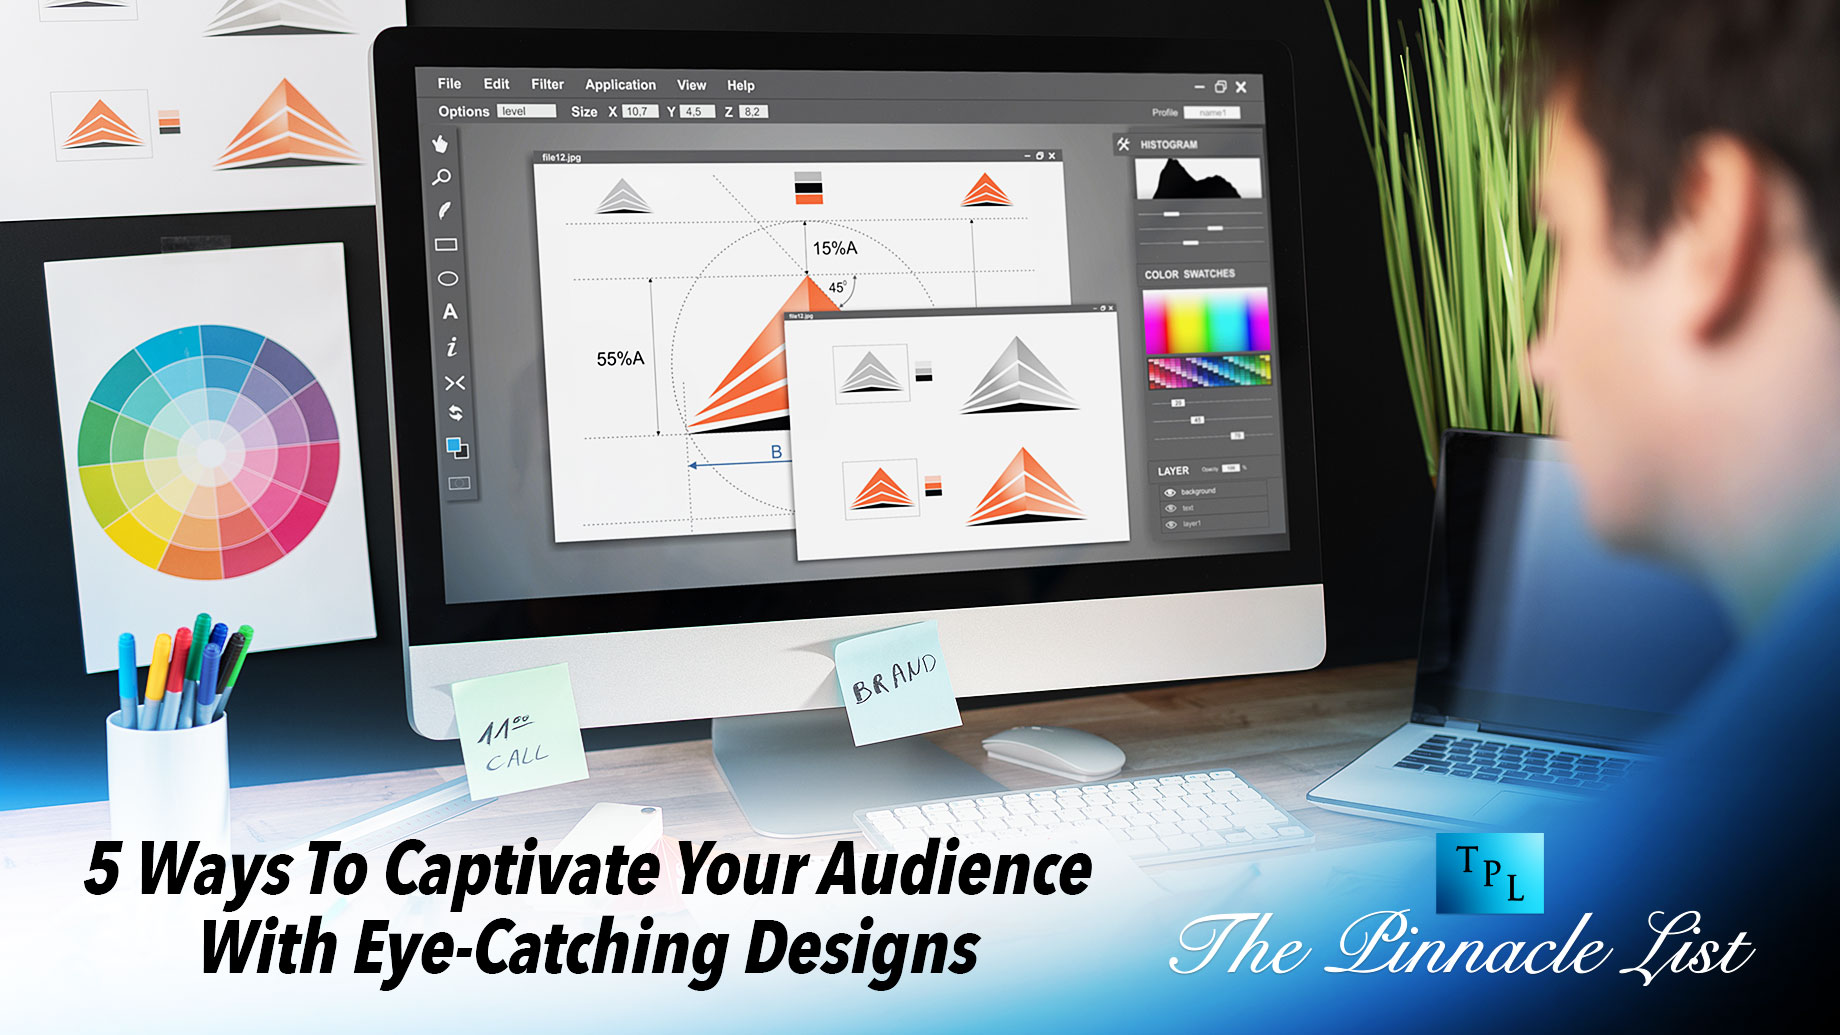 5 Ways To Captivate Your Audience With Eye-Catching Designs